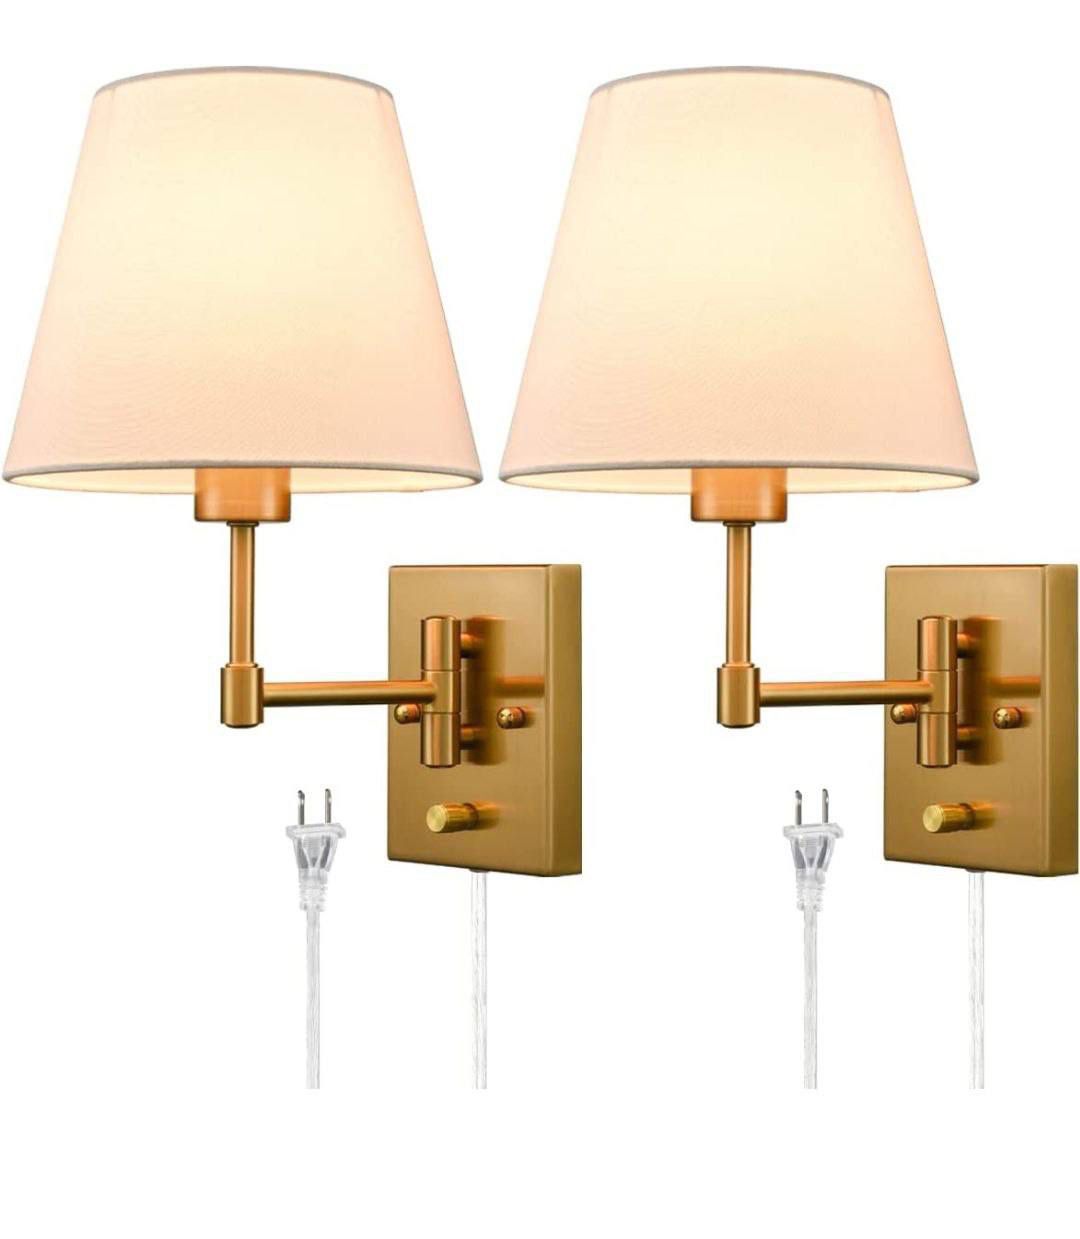 (New in Box) SAMTEEN Plug-in Wall Sconces Set of Two Beige Shade Swing Arm Wall Lamp with Plug-in Cord Wall Mount Reading Light/5-751